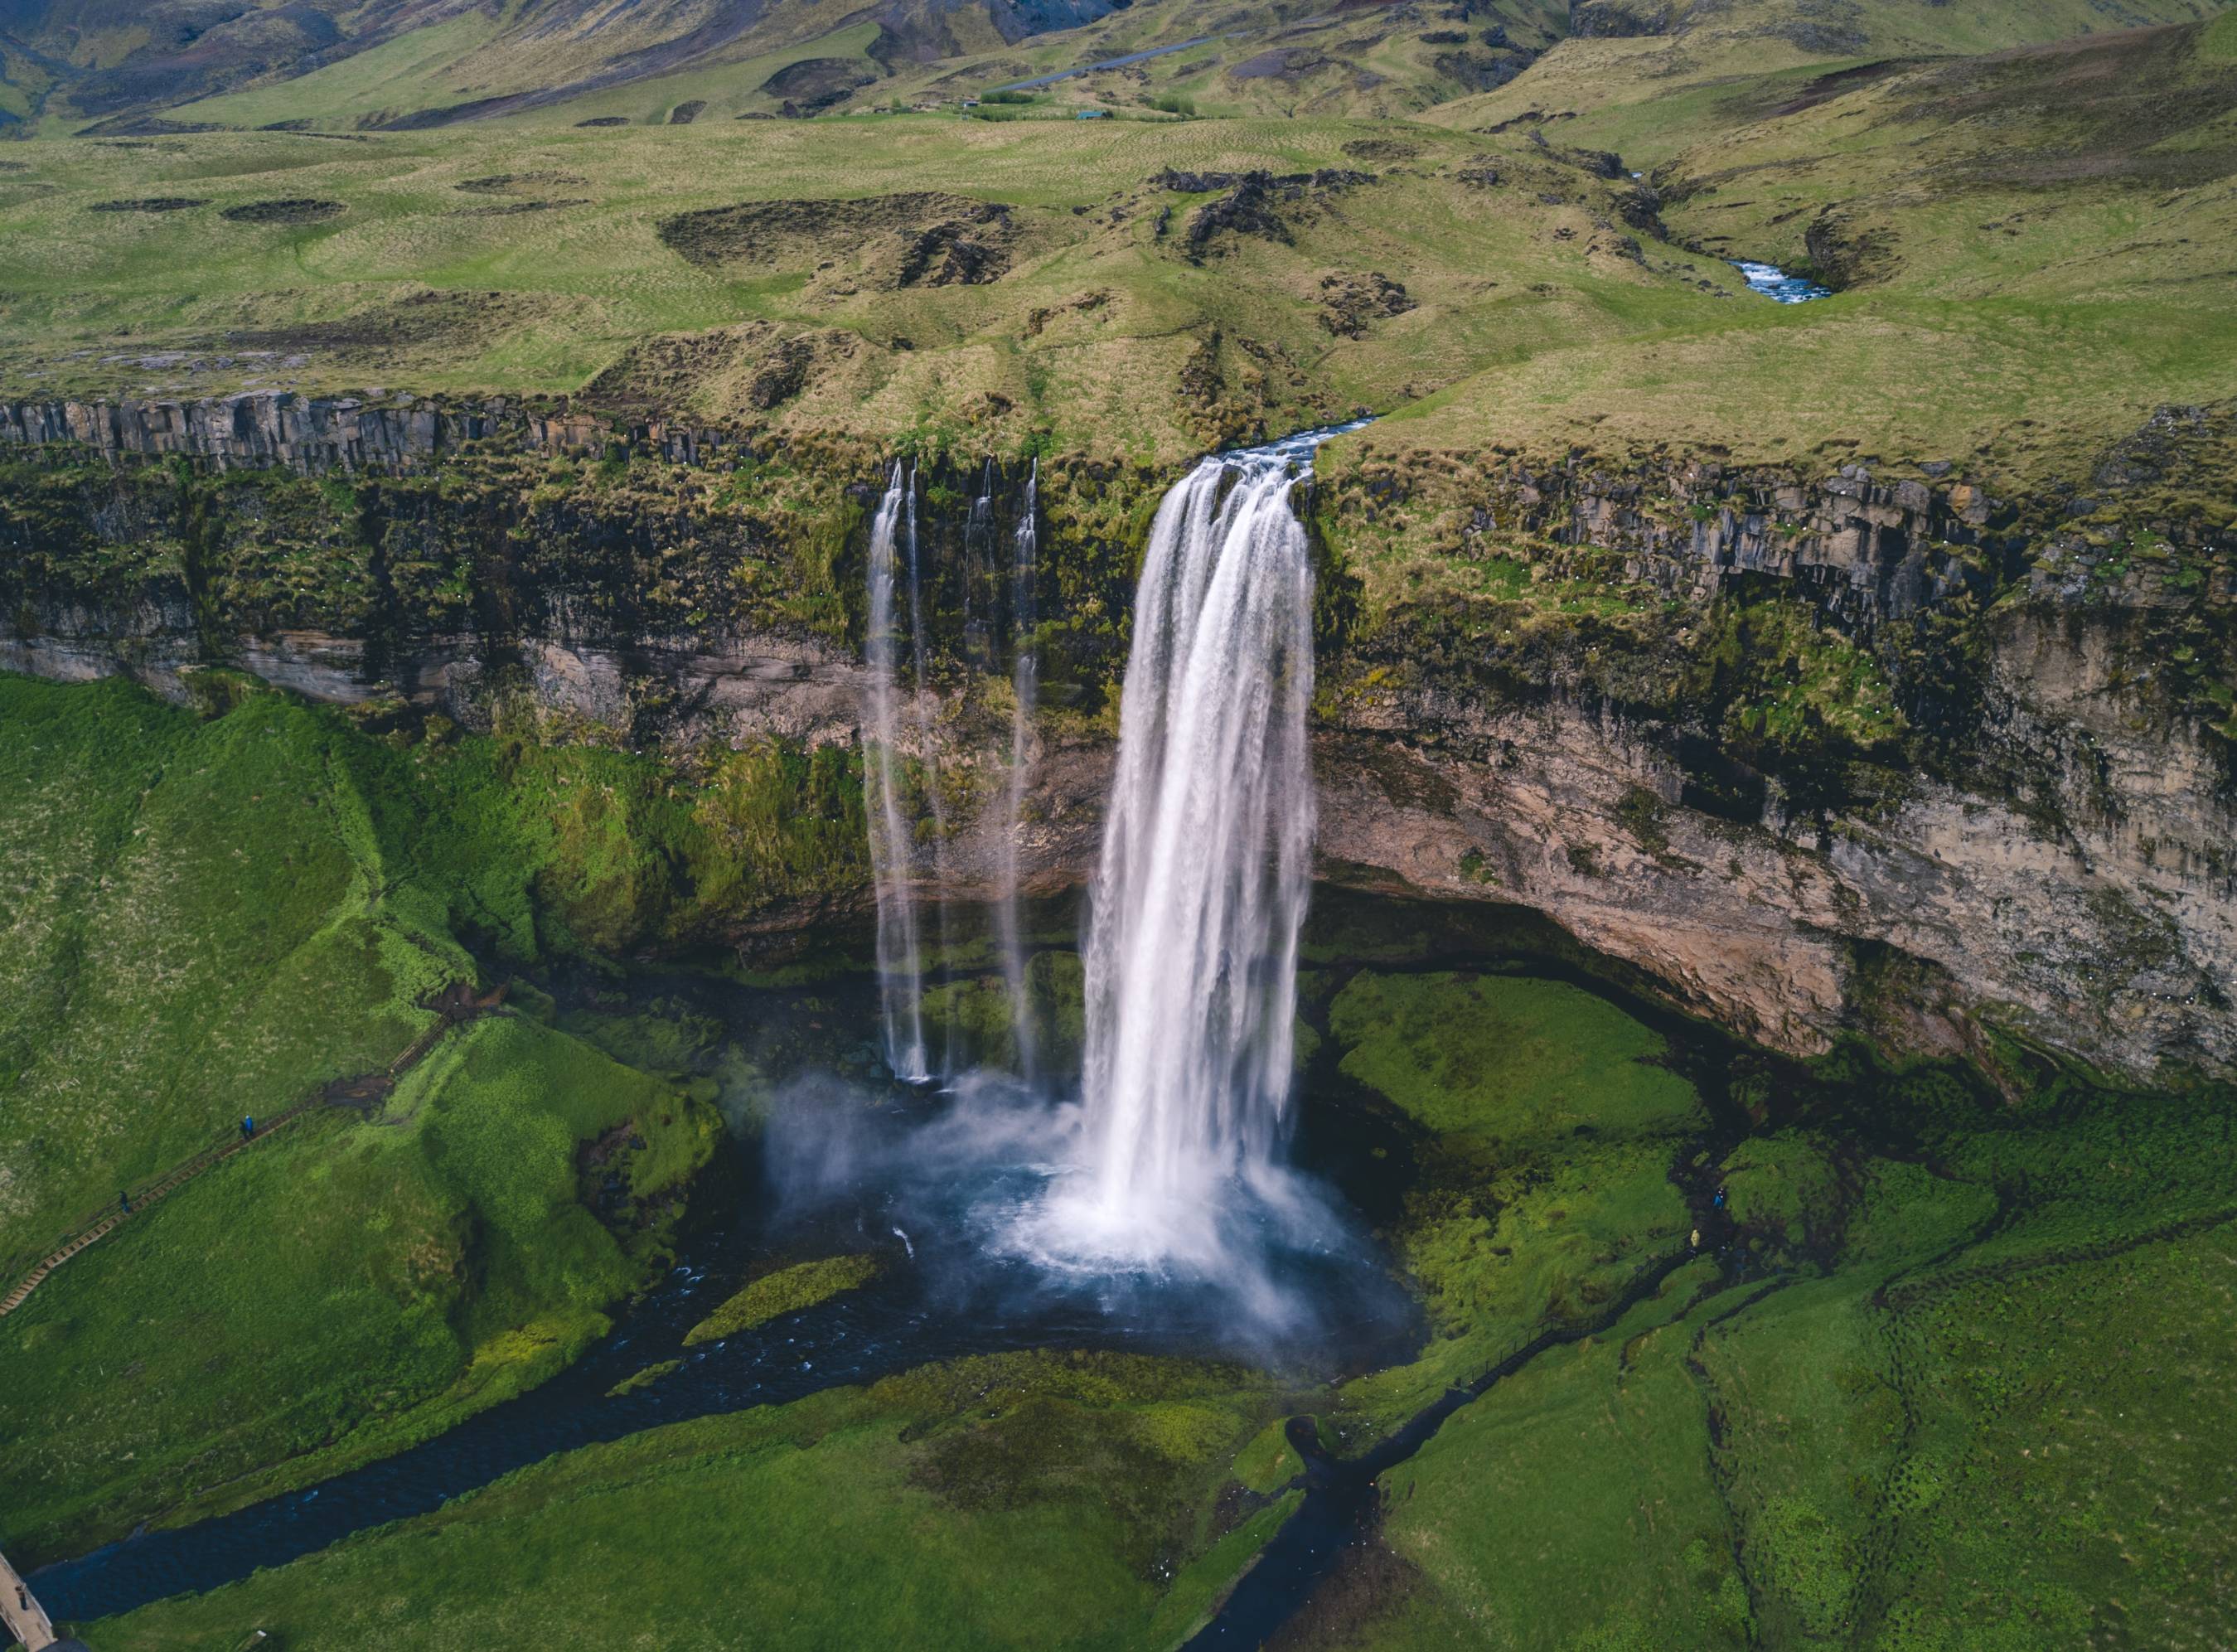 Seljalandsfoss-waterfall-in-iceland-seen-from-above-in-summer-grass-around-is-green-and-you-can-see-the-river-flowing-to-the-waterfall-from-above